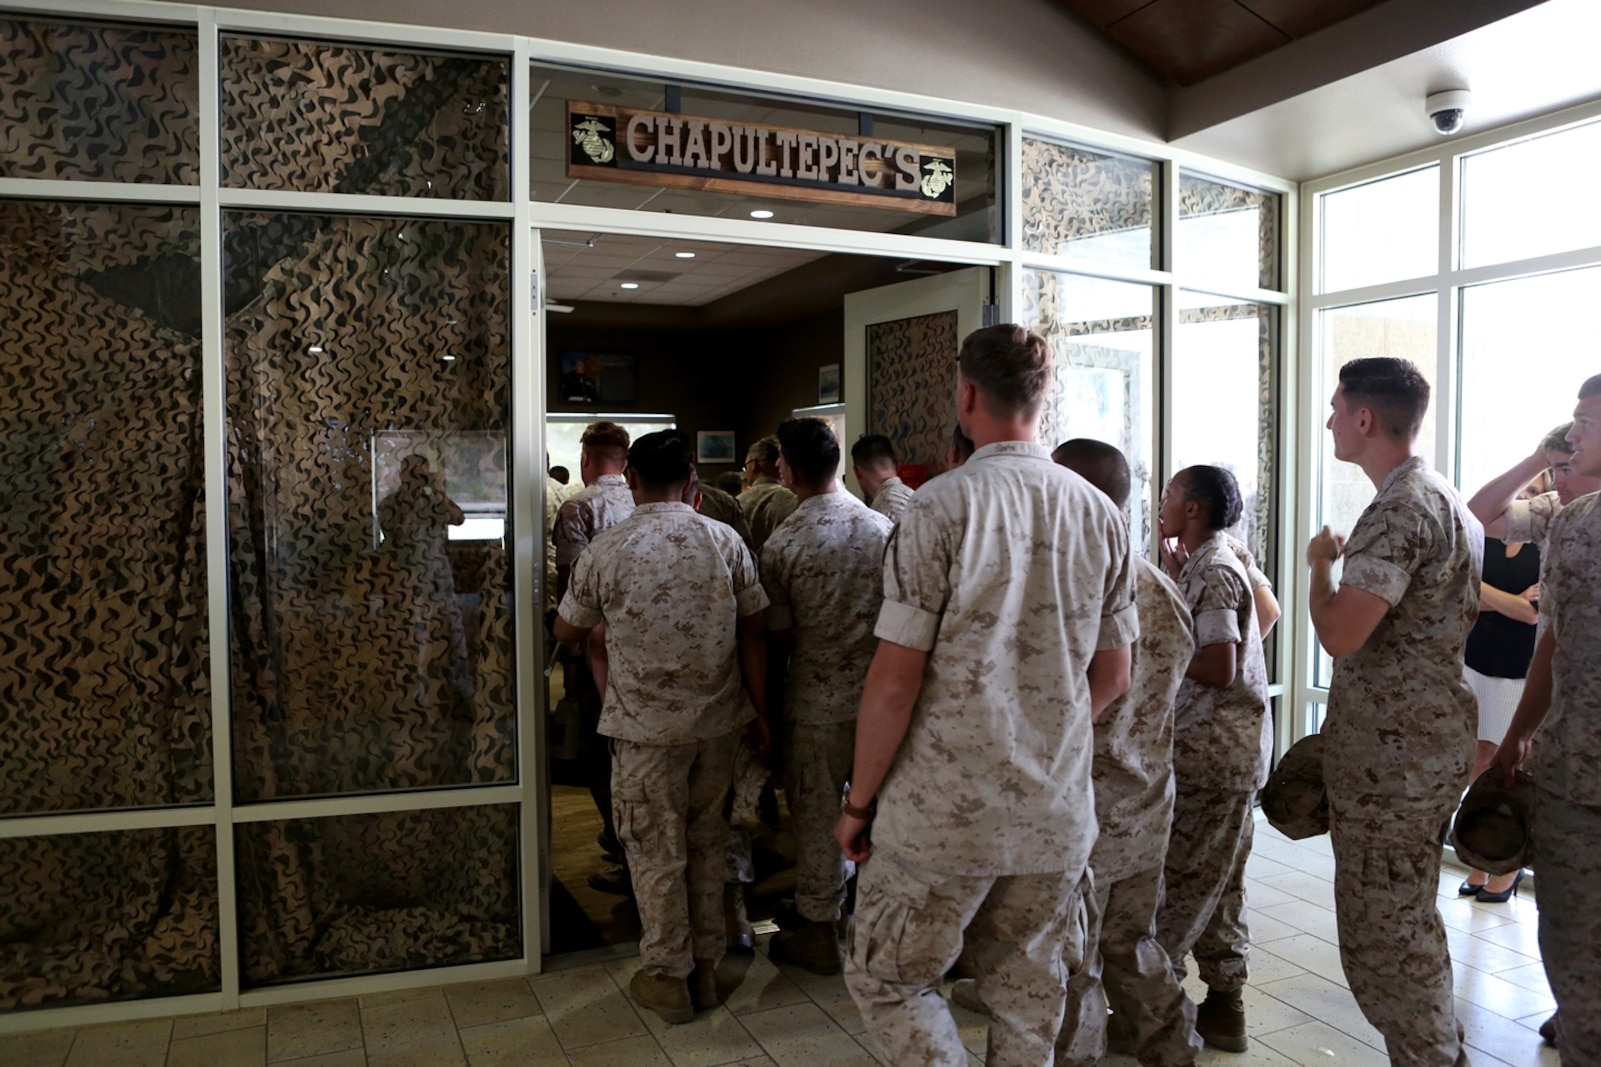 U.S. Marine non-commissioned officers from 7th Engineer Support Battalion enter their new NCO lounge, known as Chapultepec’s, in their barracks building aboard Camp Pendleton, Calif., April 15, 2016. The newly opened lounge is dedicated to give the NCOs a place in the barracks to come together and unwind, forming stronger camaraderie in their ranks. (U.S. Marine Corps photo by Cpl. Carson Gramley/released)